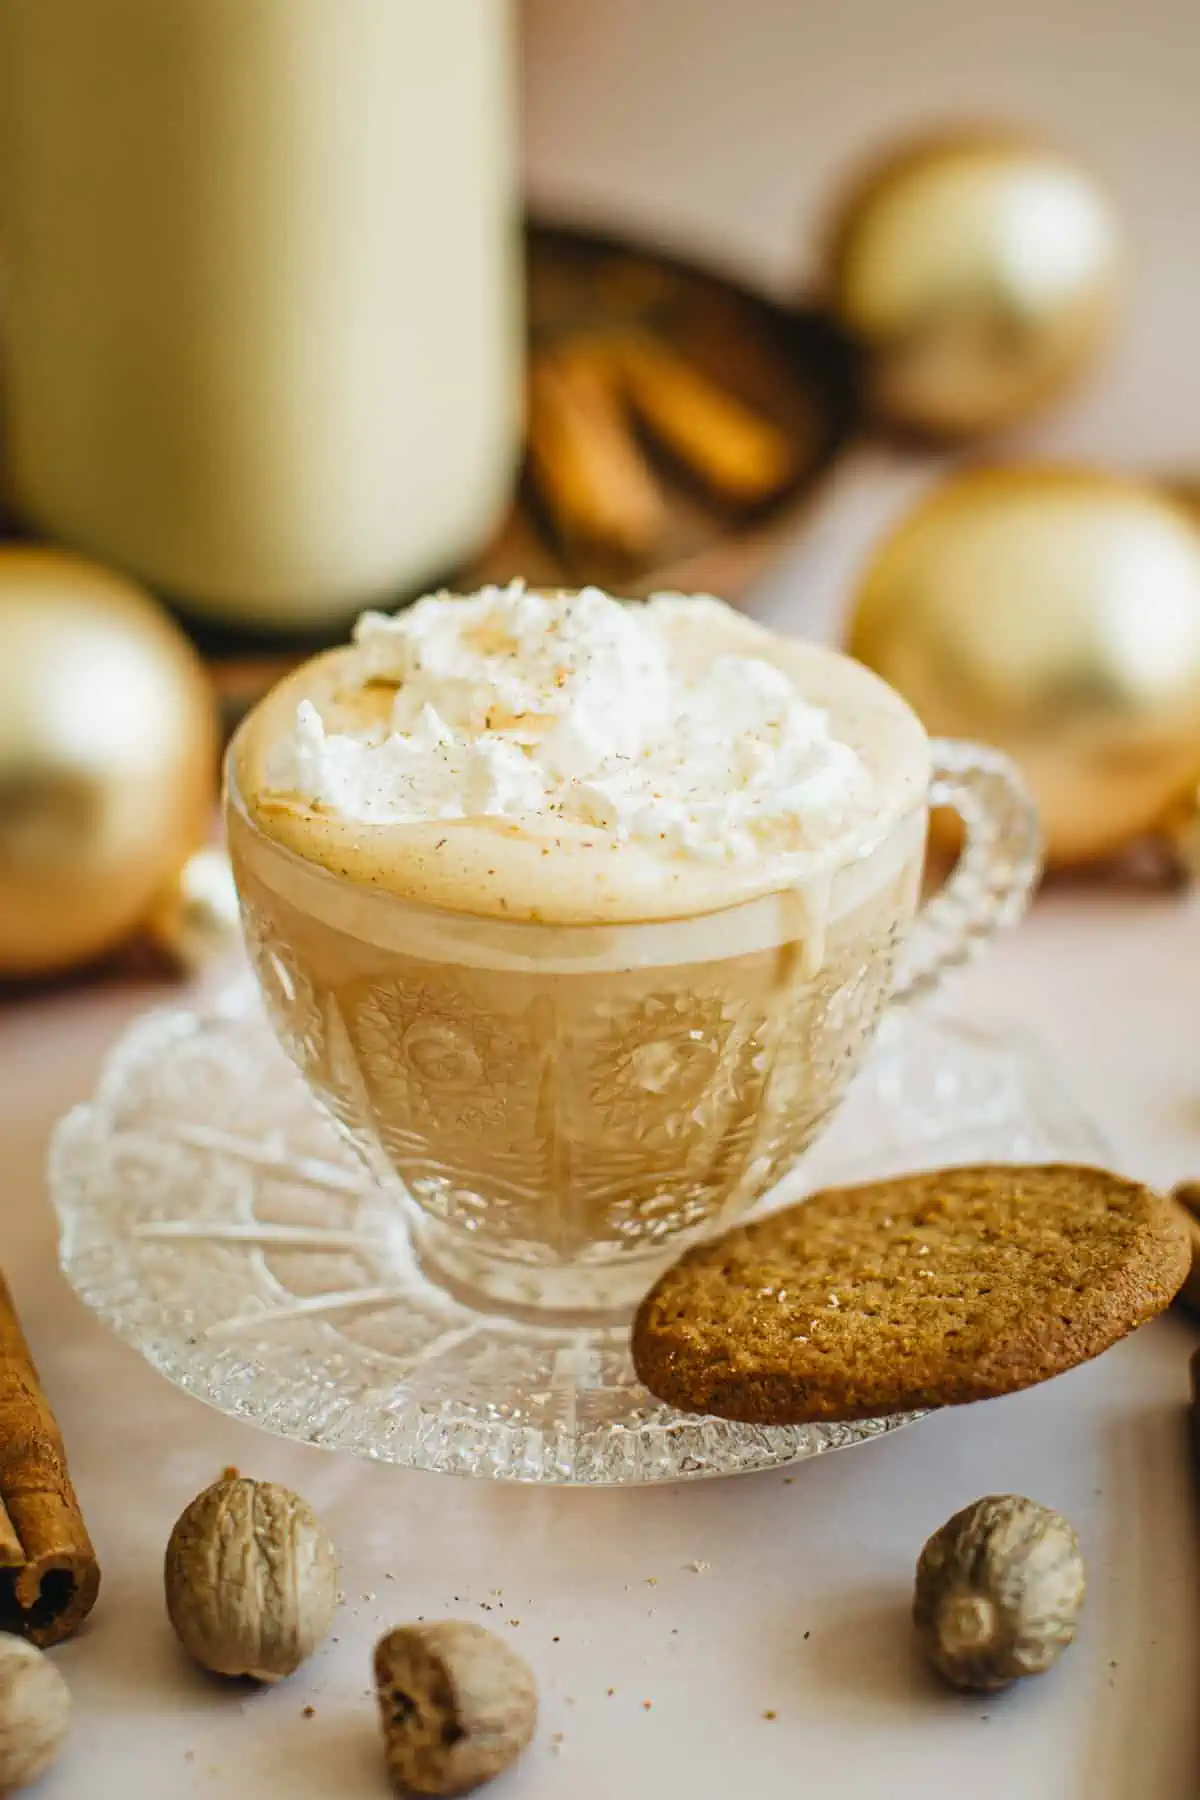 Eggnog latte topped with whipped cream and freshly grated nutmeg in a cup and saucer.